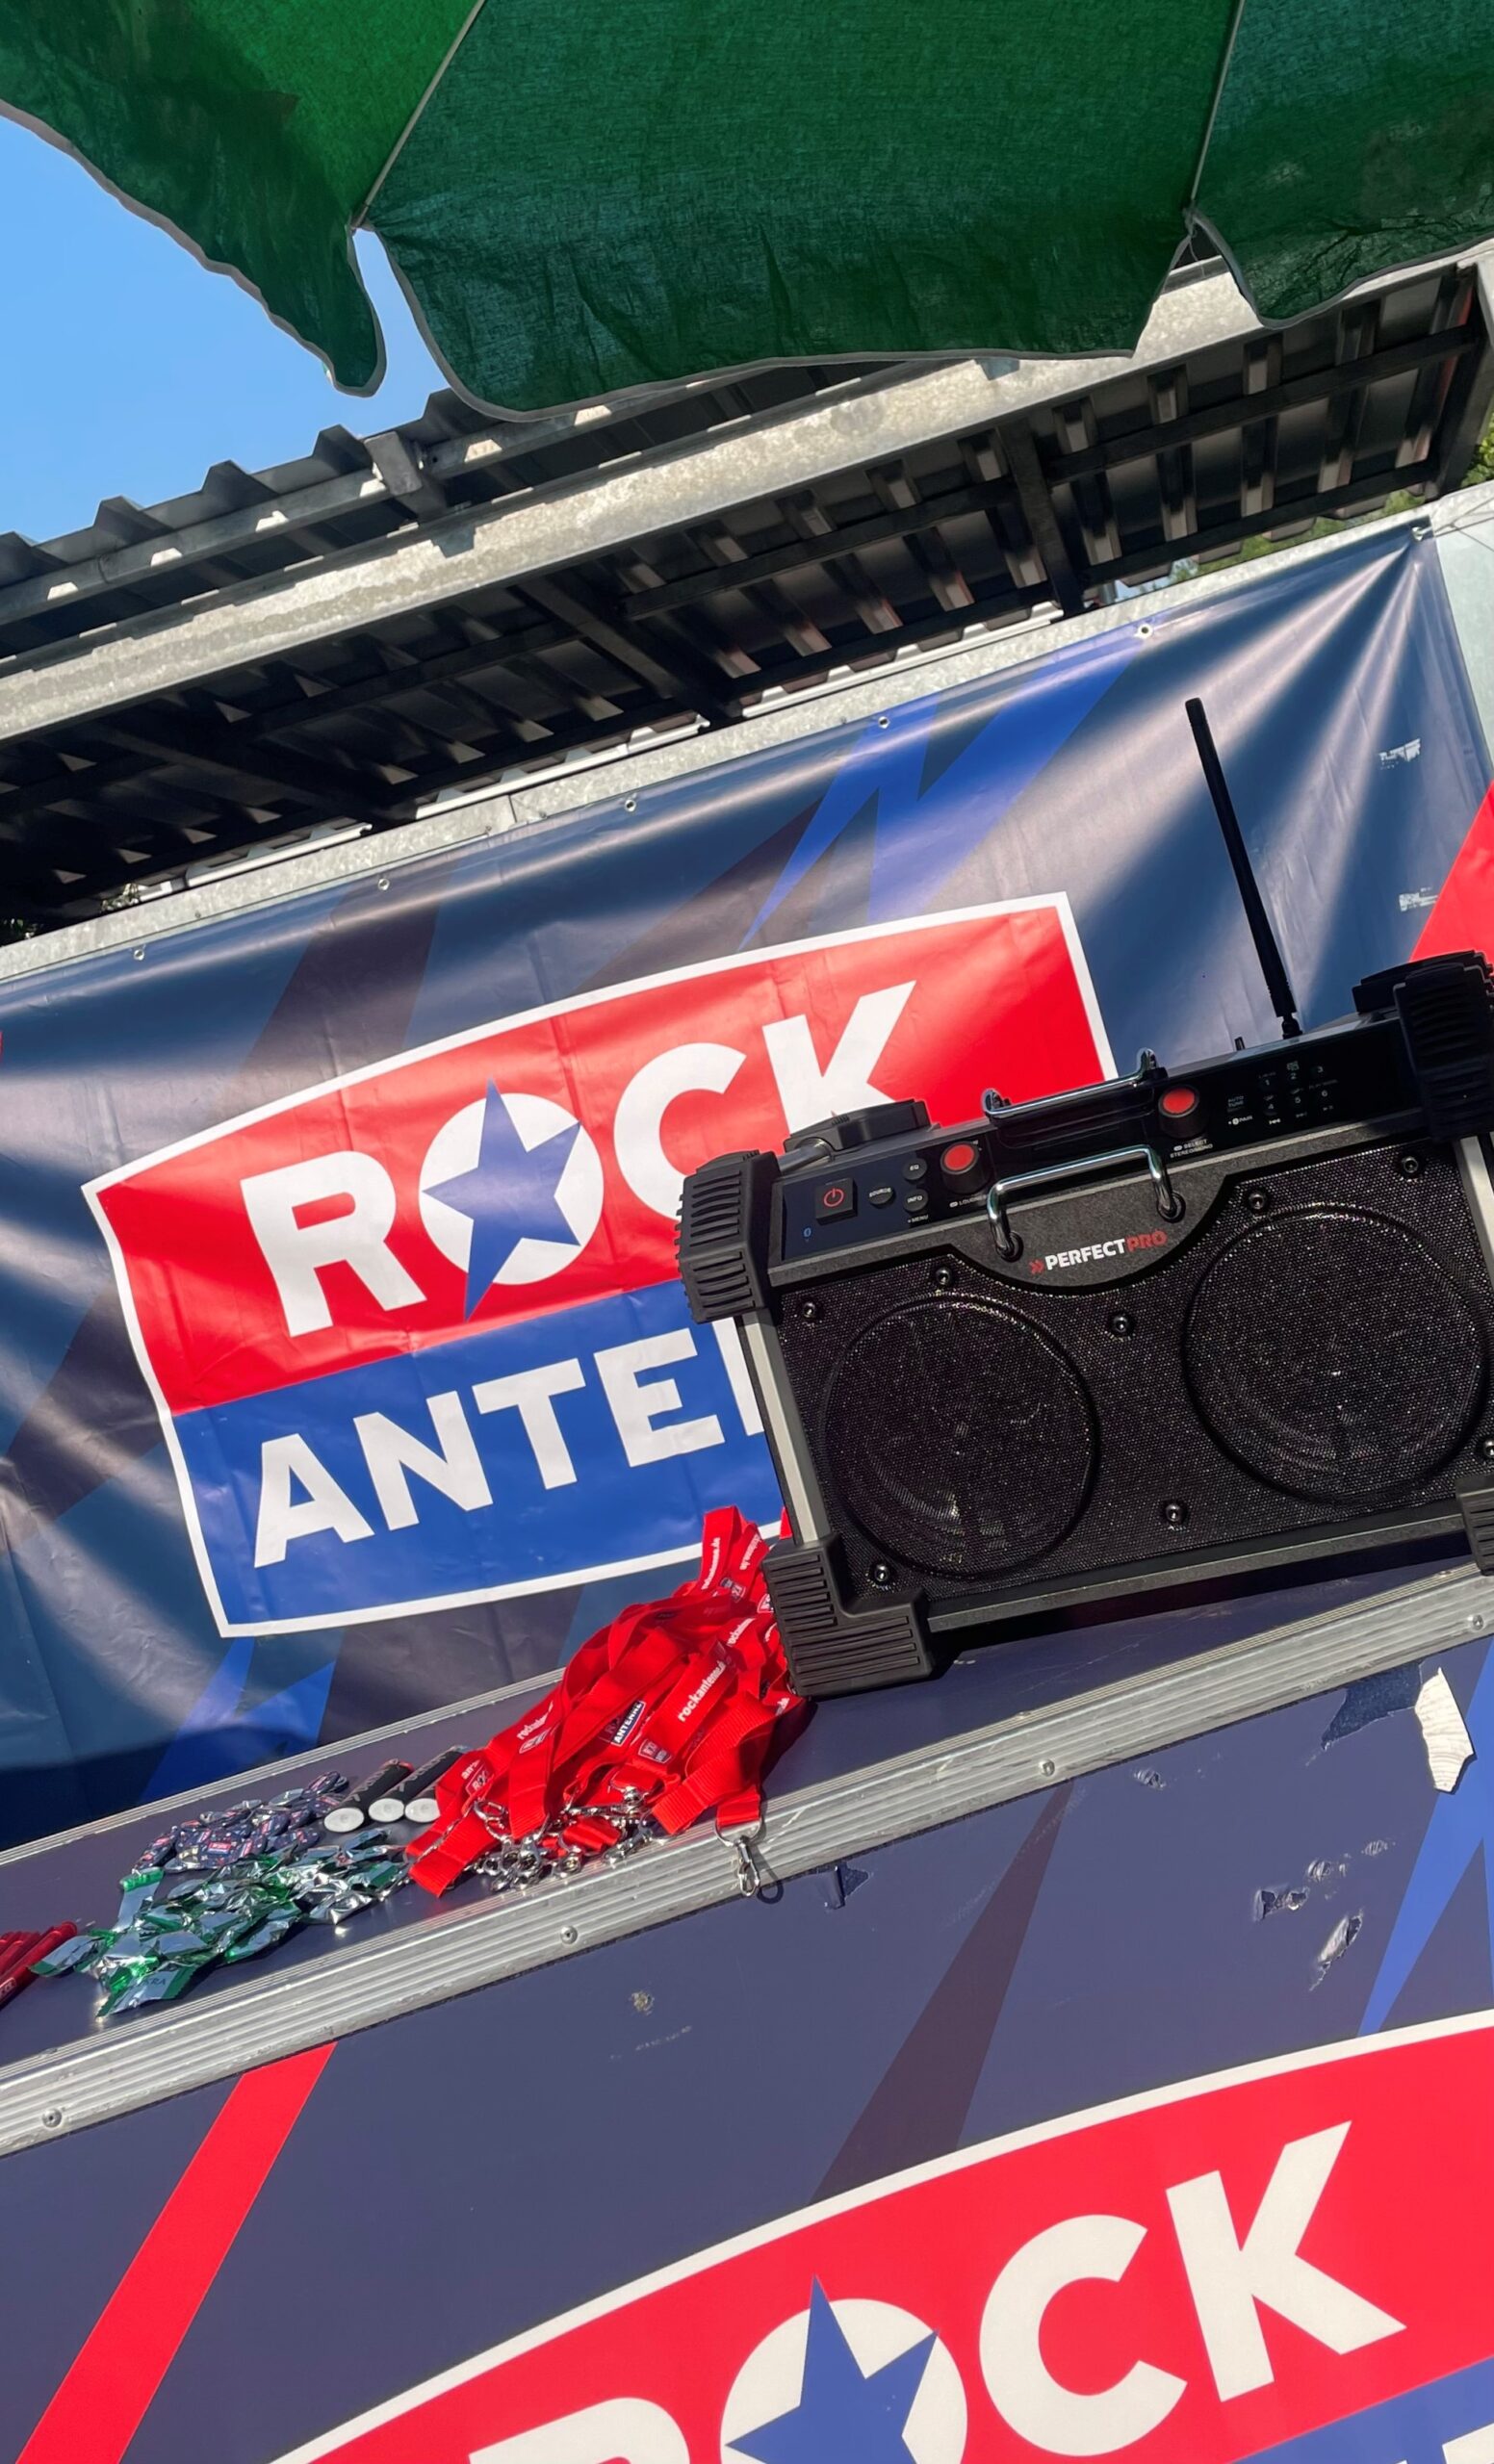 18.06.2023: The ROCK ANTENNE motorcycle tour 2023